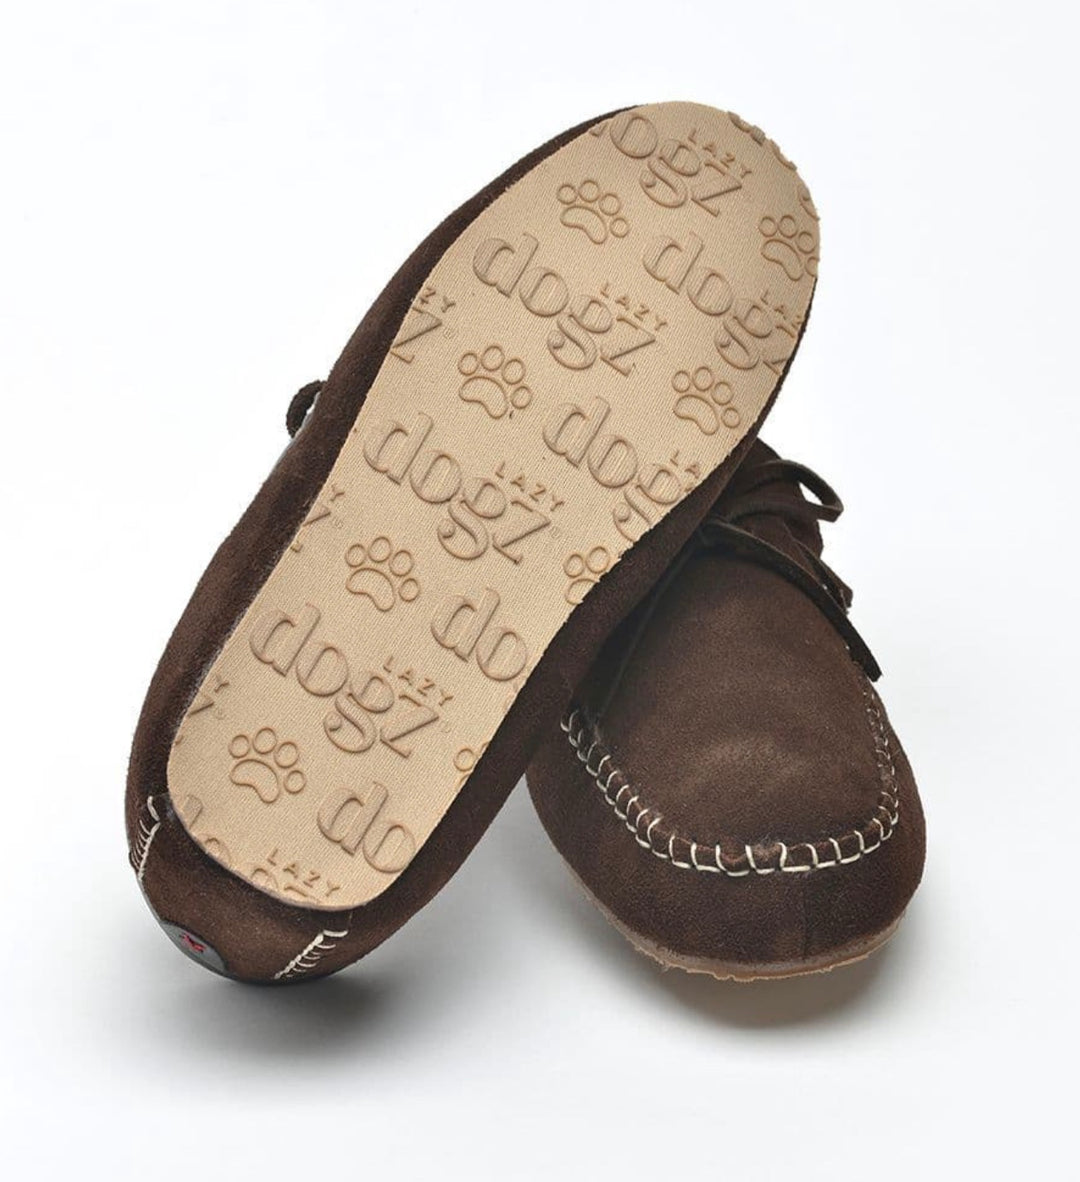 MENS ROCKY BROWN SUEDE MOCCASIN SLIPPER